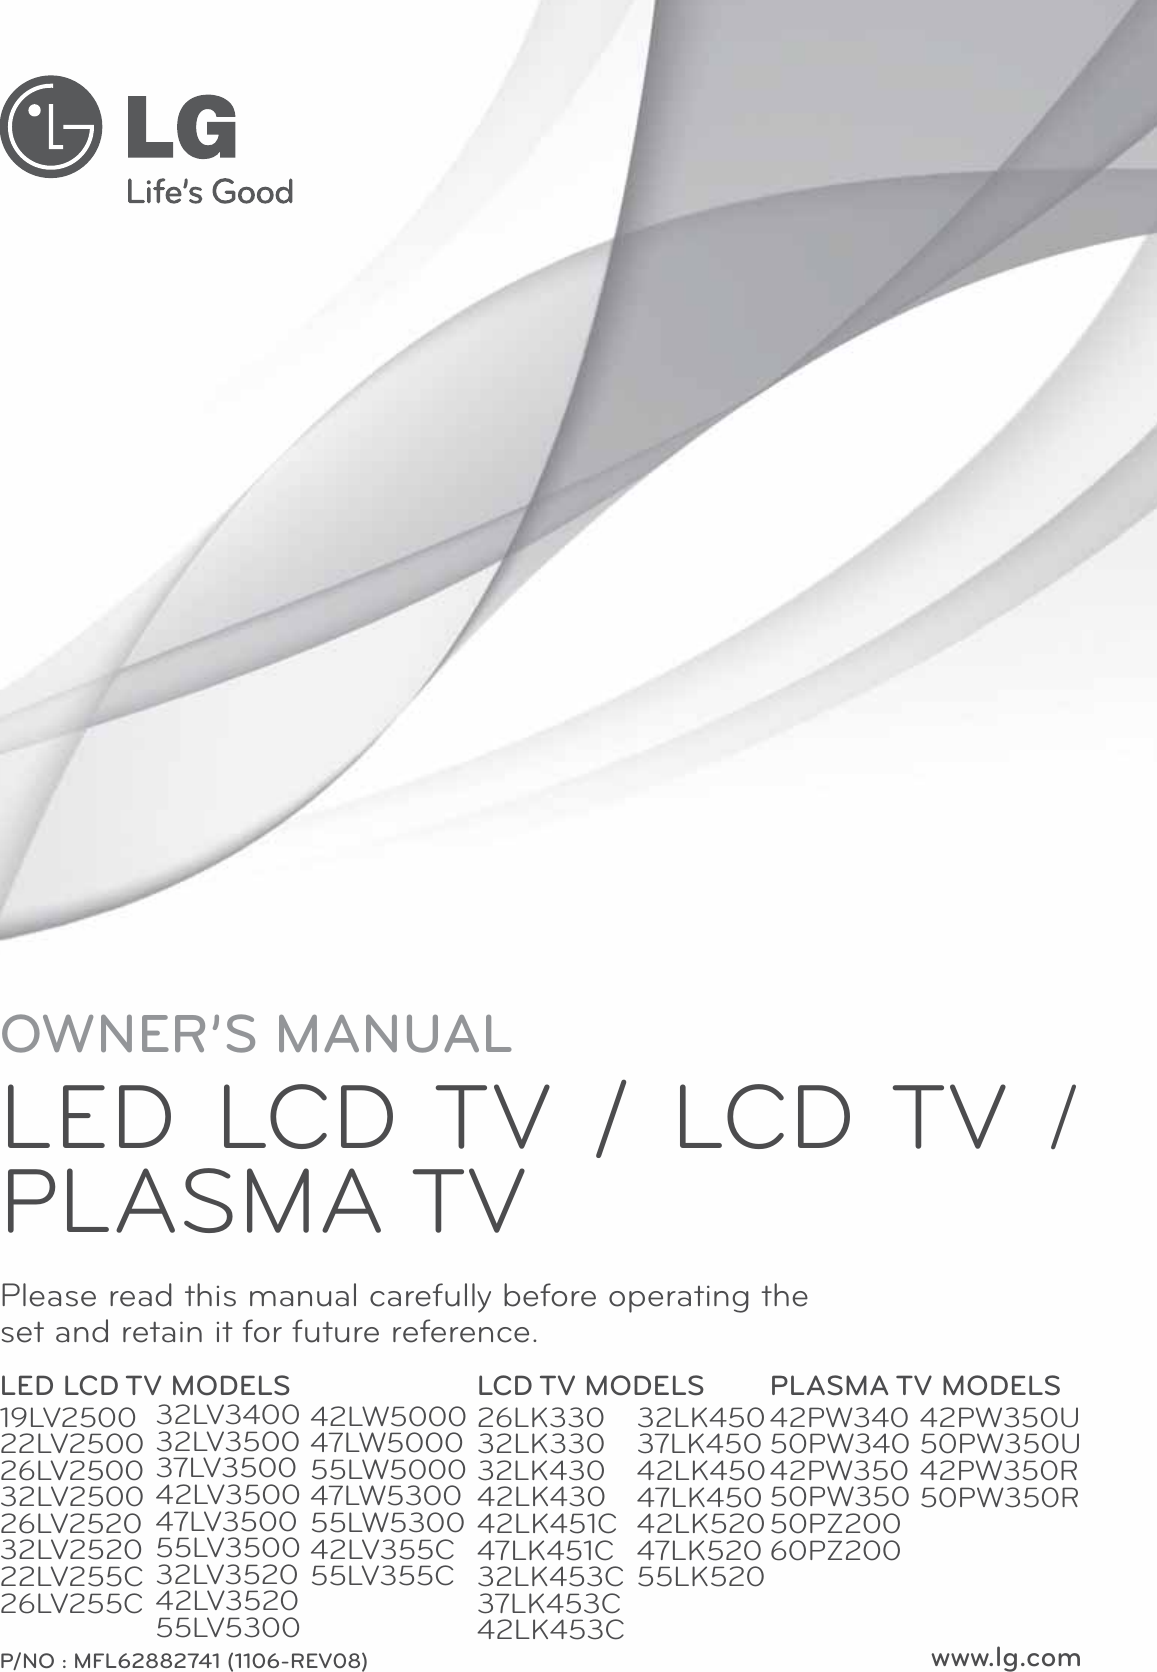 OWNER’S MANUALLED LCD TV / LCD TV / PLASMA TV Please read this manual carefully before operating the set and retain it for future reference.P/NO : MFL62882741 (1106-REV08) www.lg.comLED LCD TV MODELS19LV250022LV250026LV250032LV250026LV252032LV252022LV255C26LV255CLCD TV MODELS26LK33032LK33032LK43042LK43042LK451C47LK451C32LK453C37LK453C42LK453CPLASMA TV MODELS42PW34050PW34042PW35050PW35050PZ20060PZ20032LV340032LV350037LV350042LV350047LV350055LV350032LV352042LV352055LV530032LK45037LK45042LK45047LK45042LK52047LK52055LK52042PW350U50PW350U42PW350R50PW350R42LW500047LW500055LW500047LW530055LW530042LV355C55LV355C